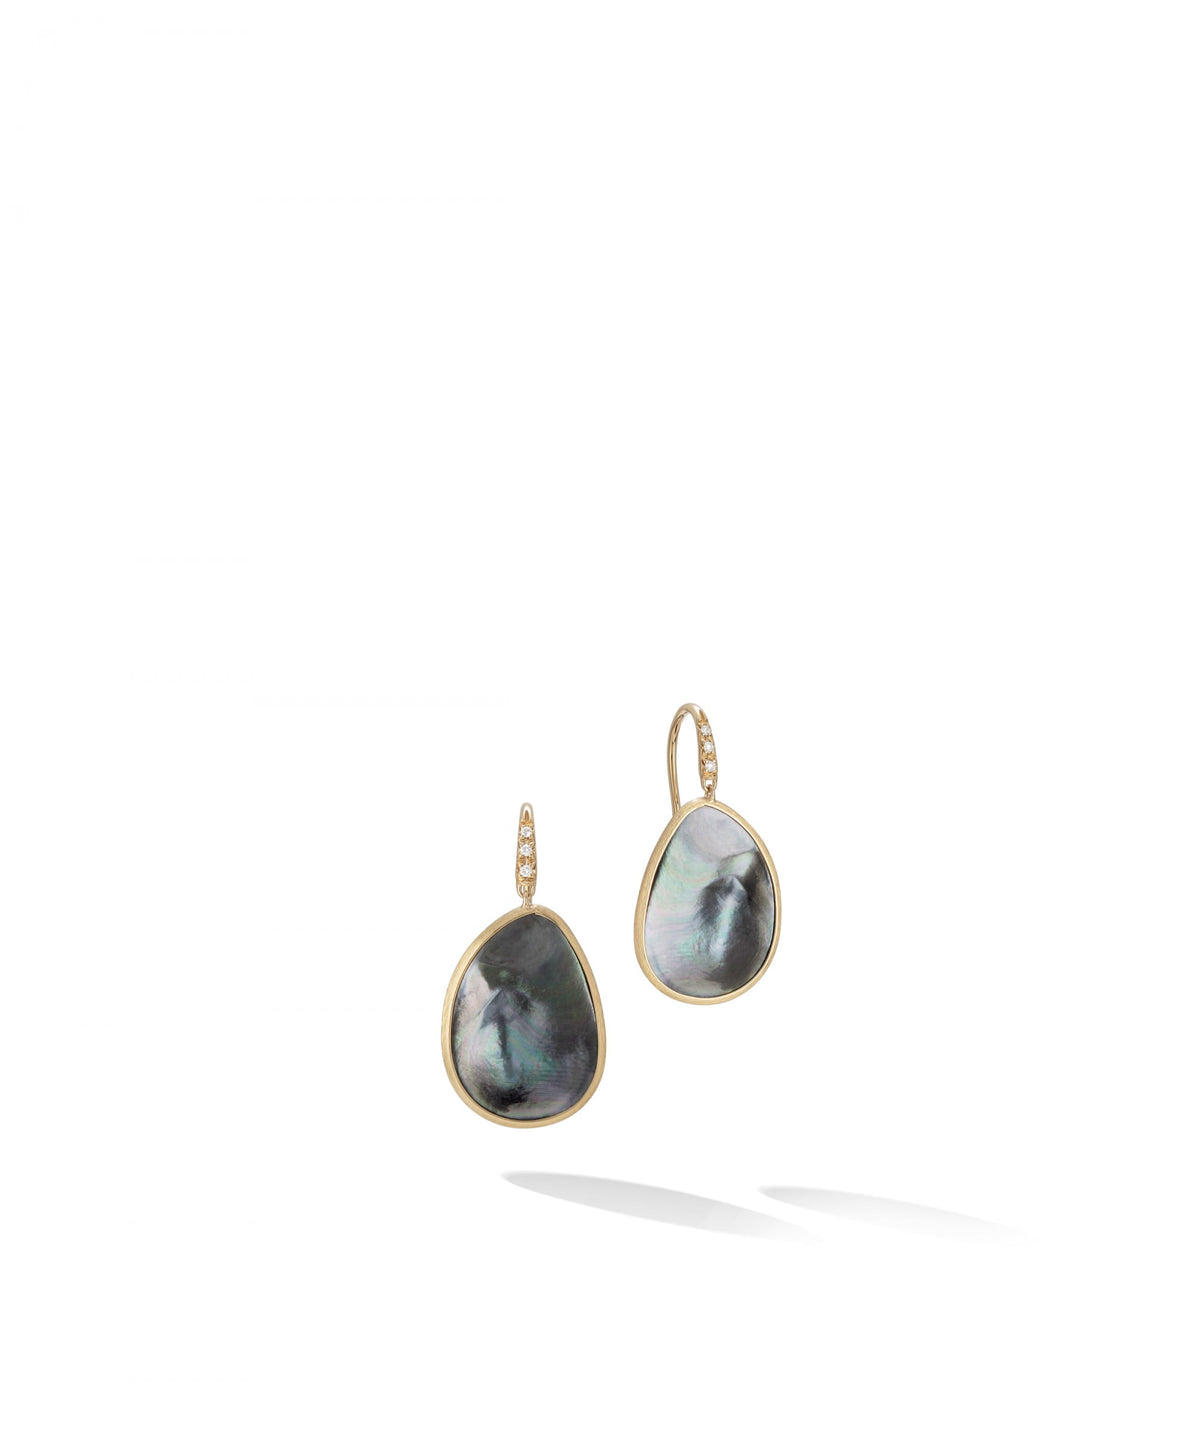 Lunaria Earrings in 18k Yellow Gold, Grey Mother of Pearl and Diamond Studded French Hooks - Orsini Jewellers NZ